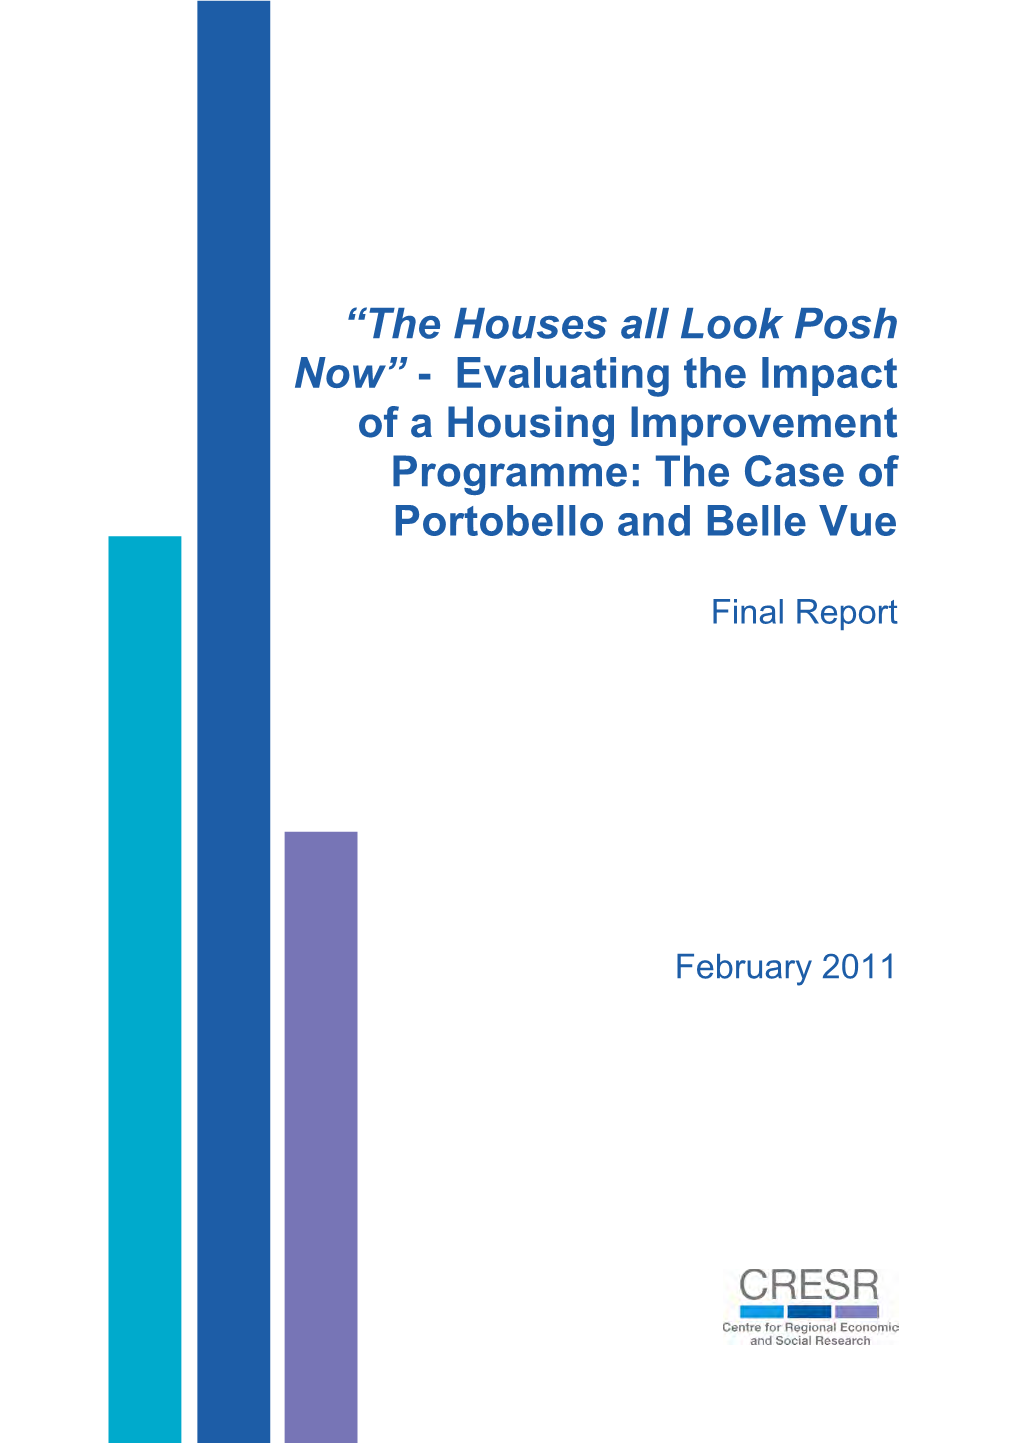 Evaluating the Impact of a Housing Improvement Programme: the Case of Portobello and Belle Vue